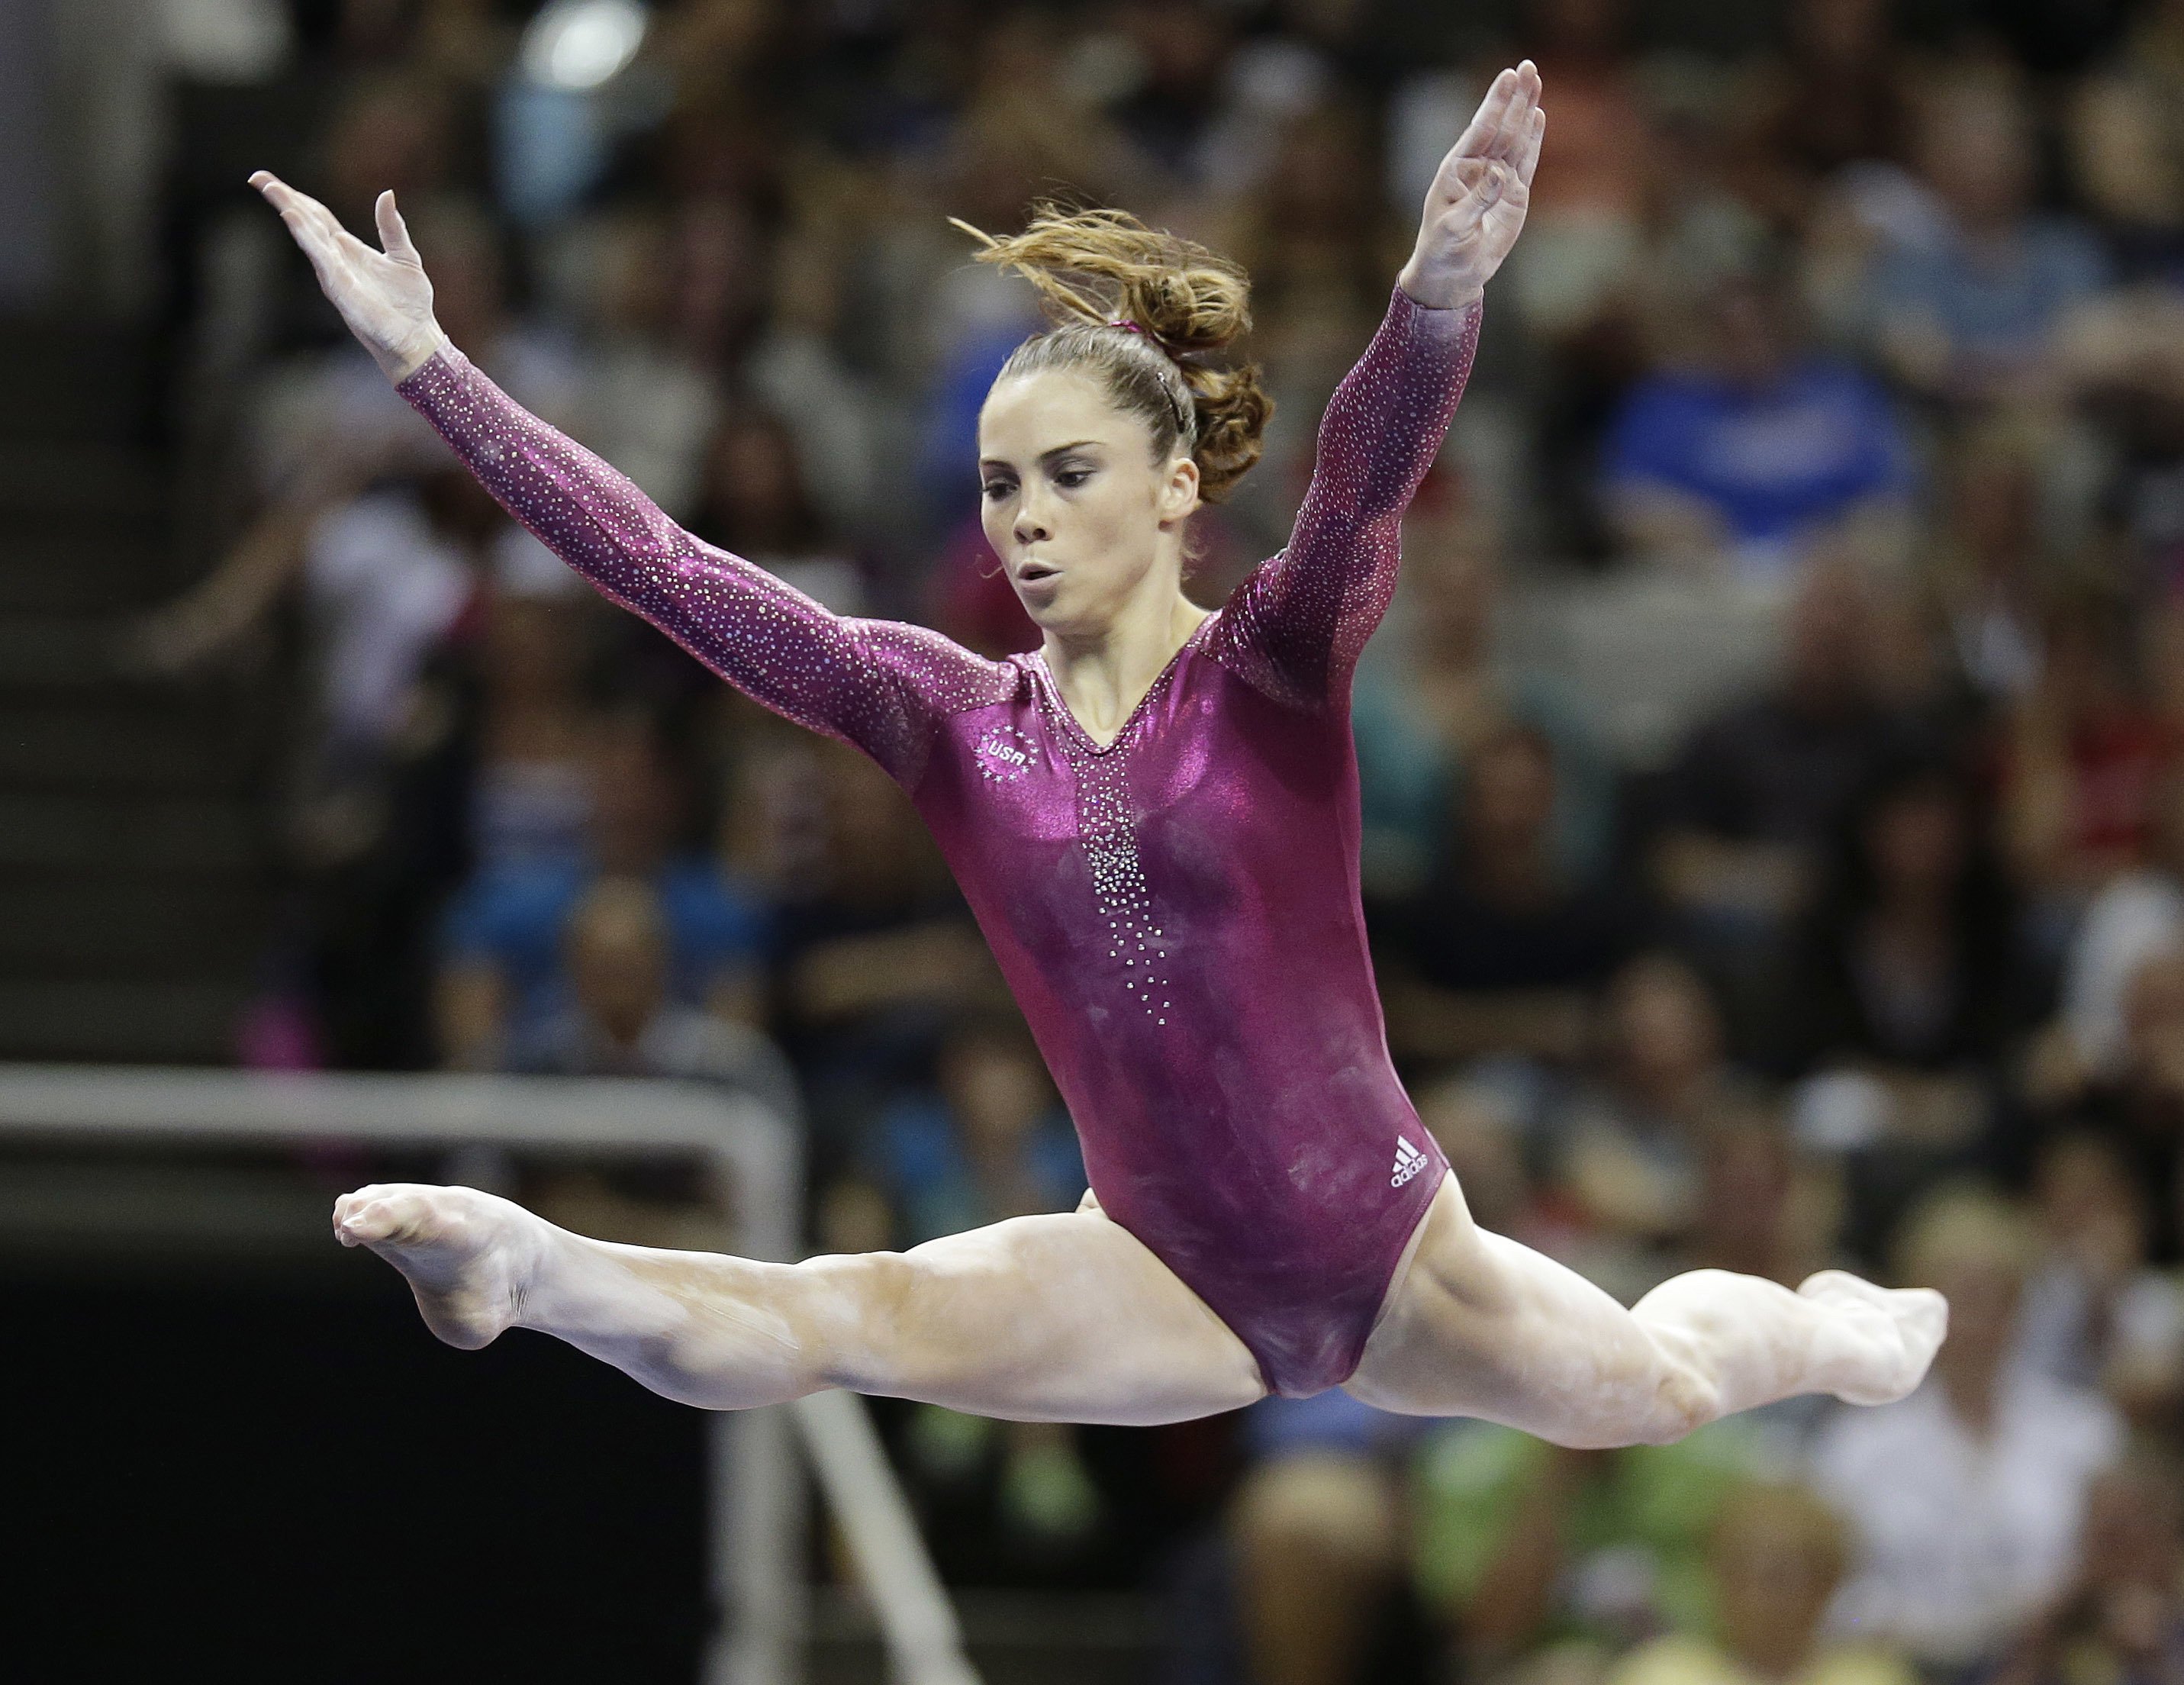 Gymnast McKayla Maroney alleges sexual abuse by team doctor.